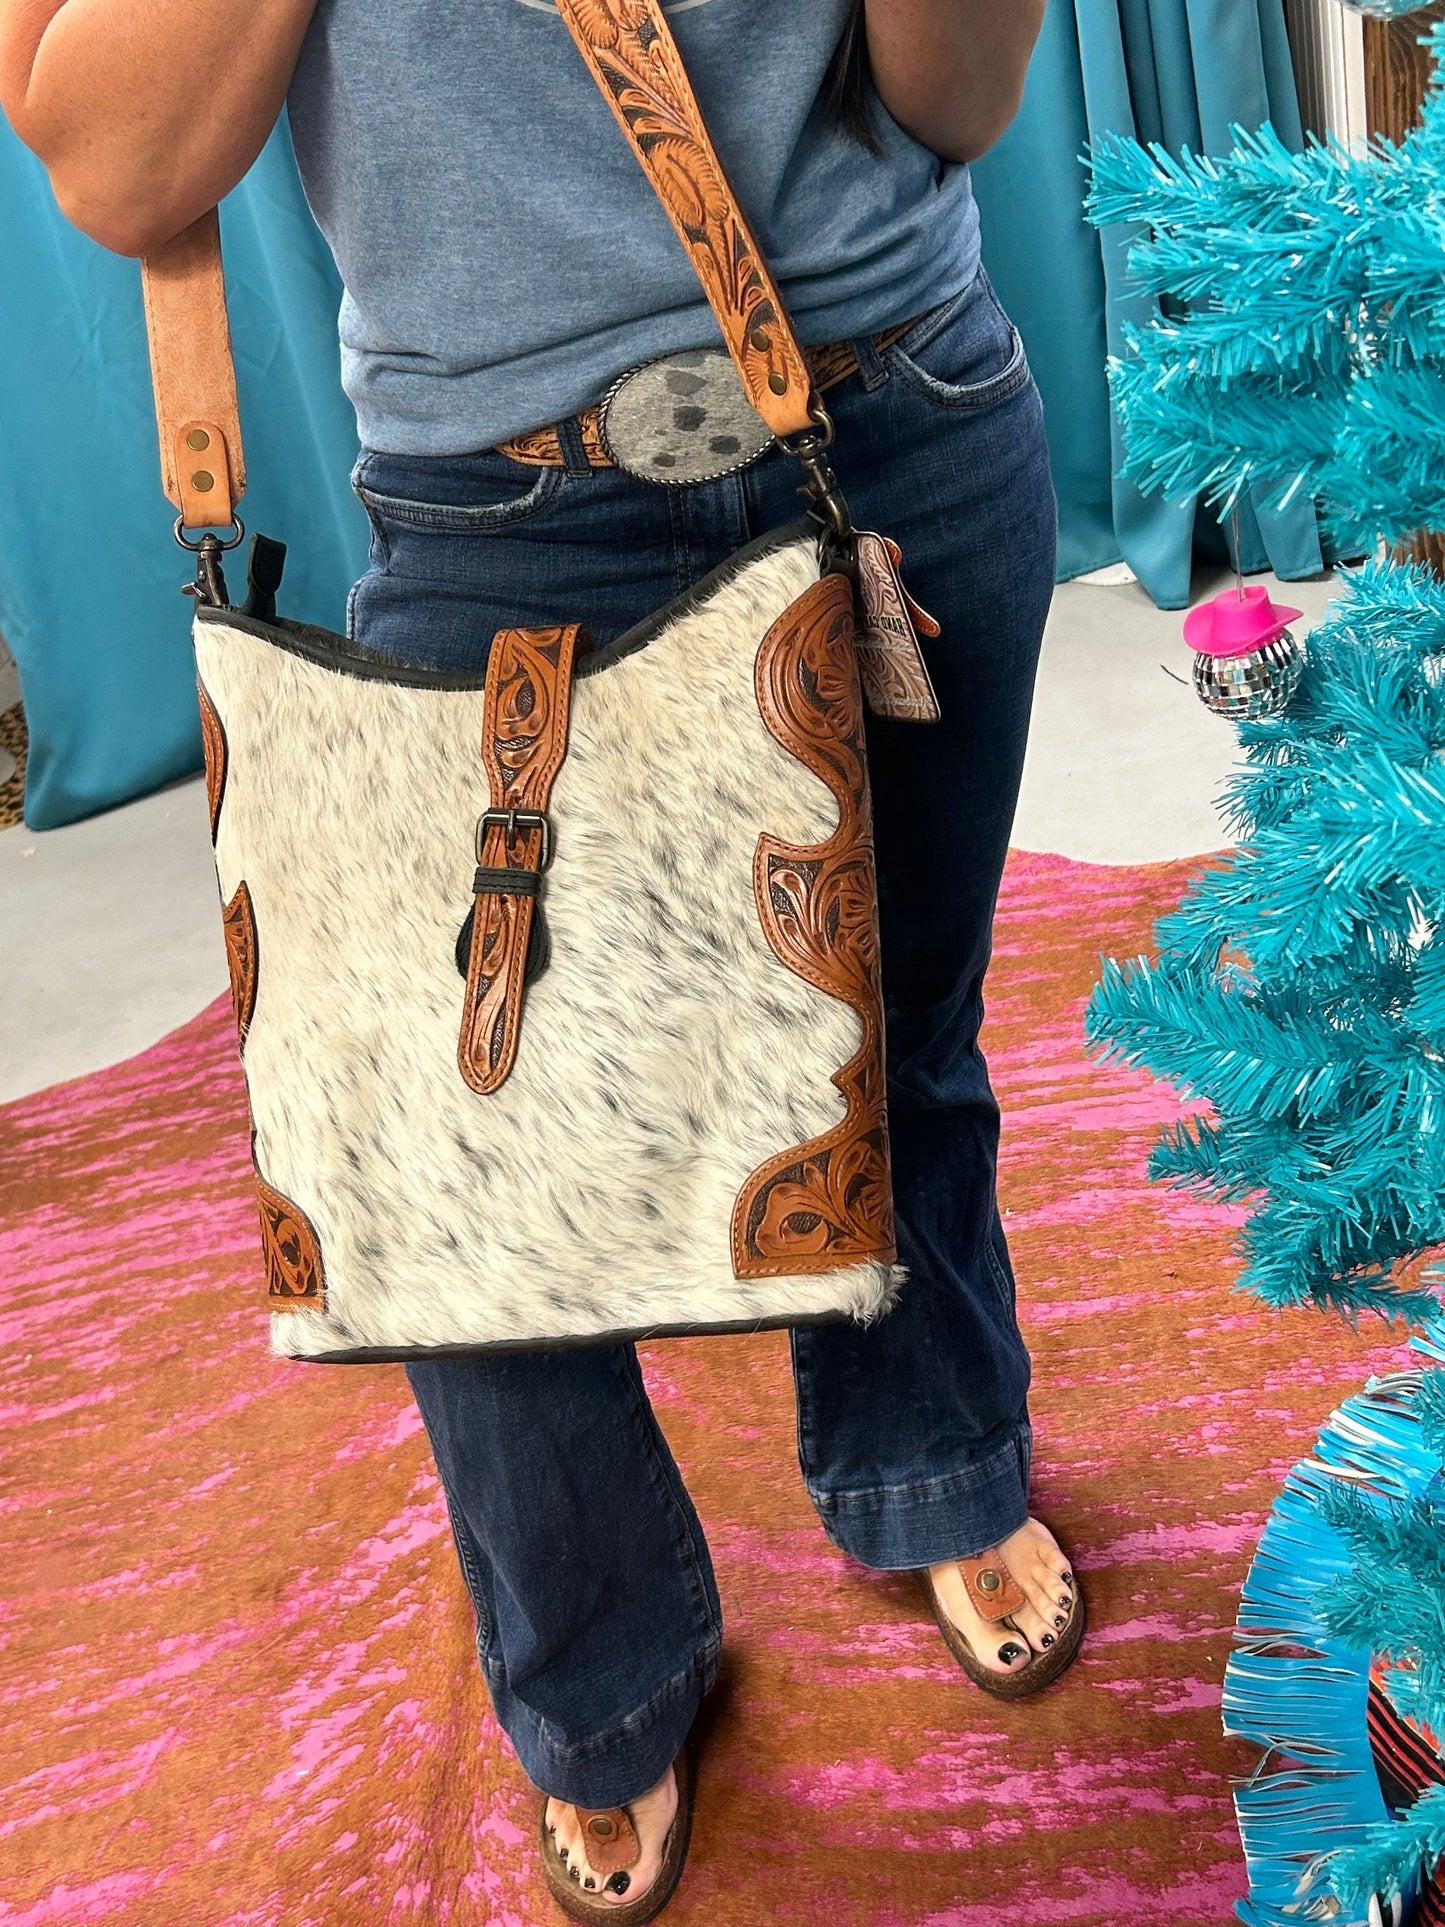 Tooled and Cowhide Conceal & Carry Bag